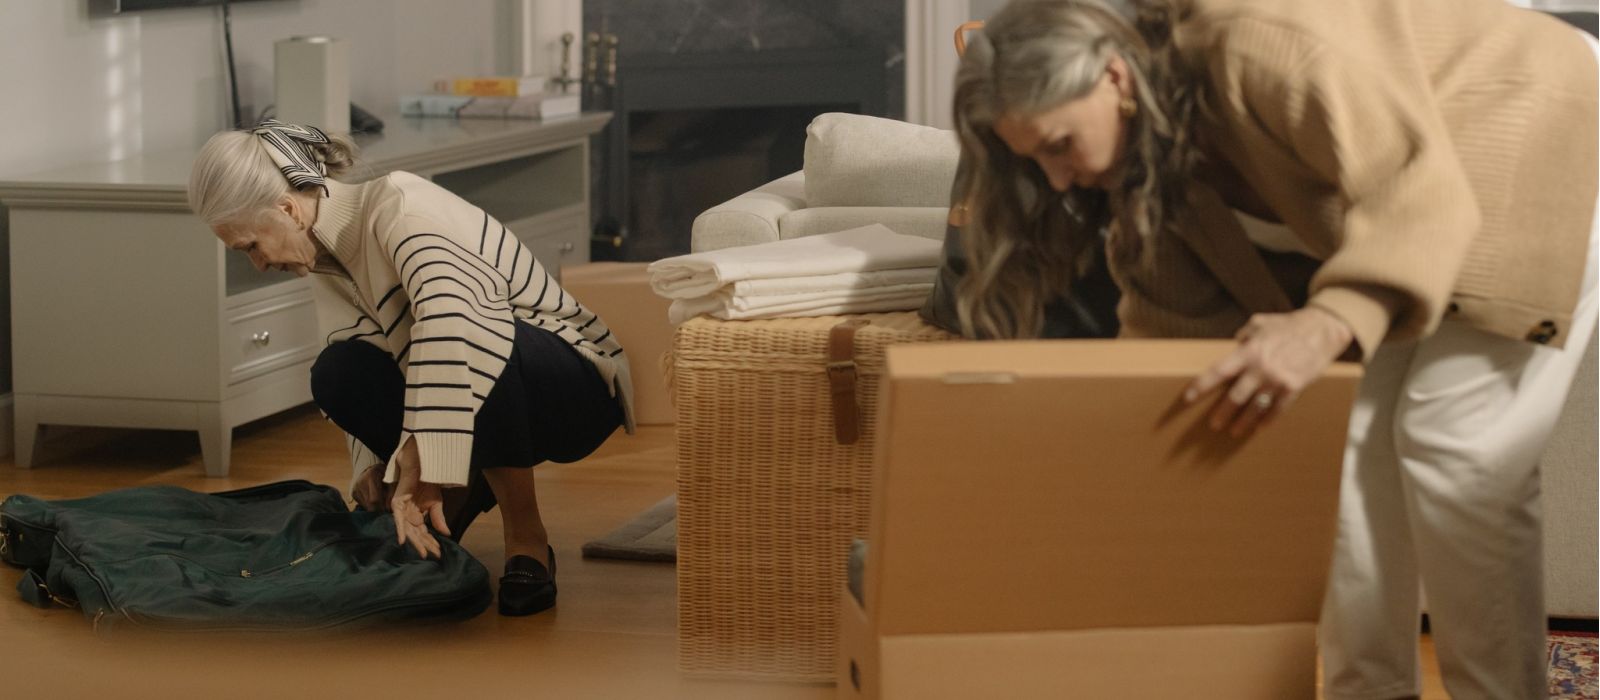 Two women packing boxes in a living room